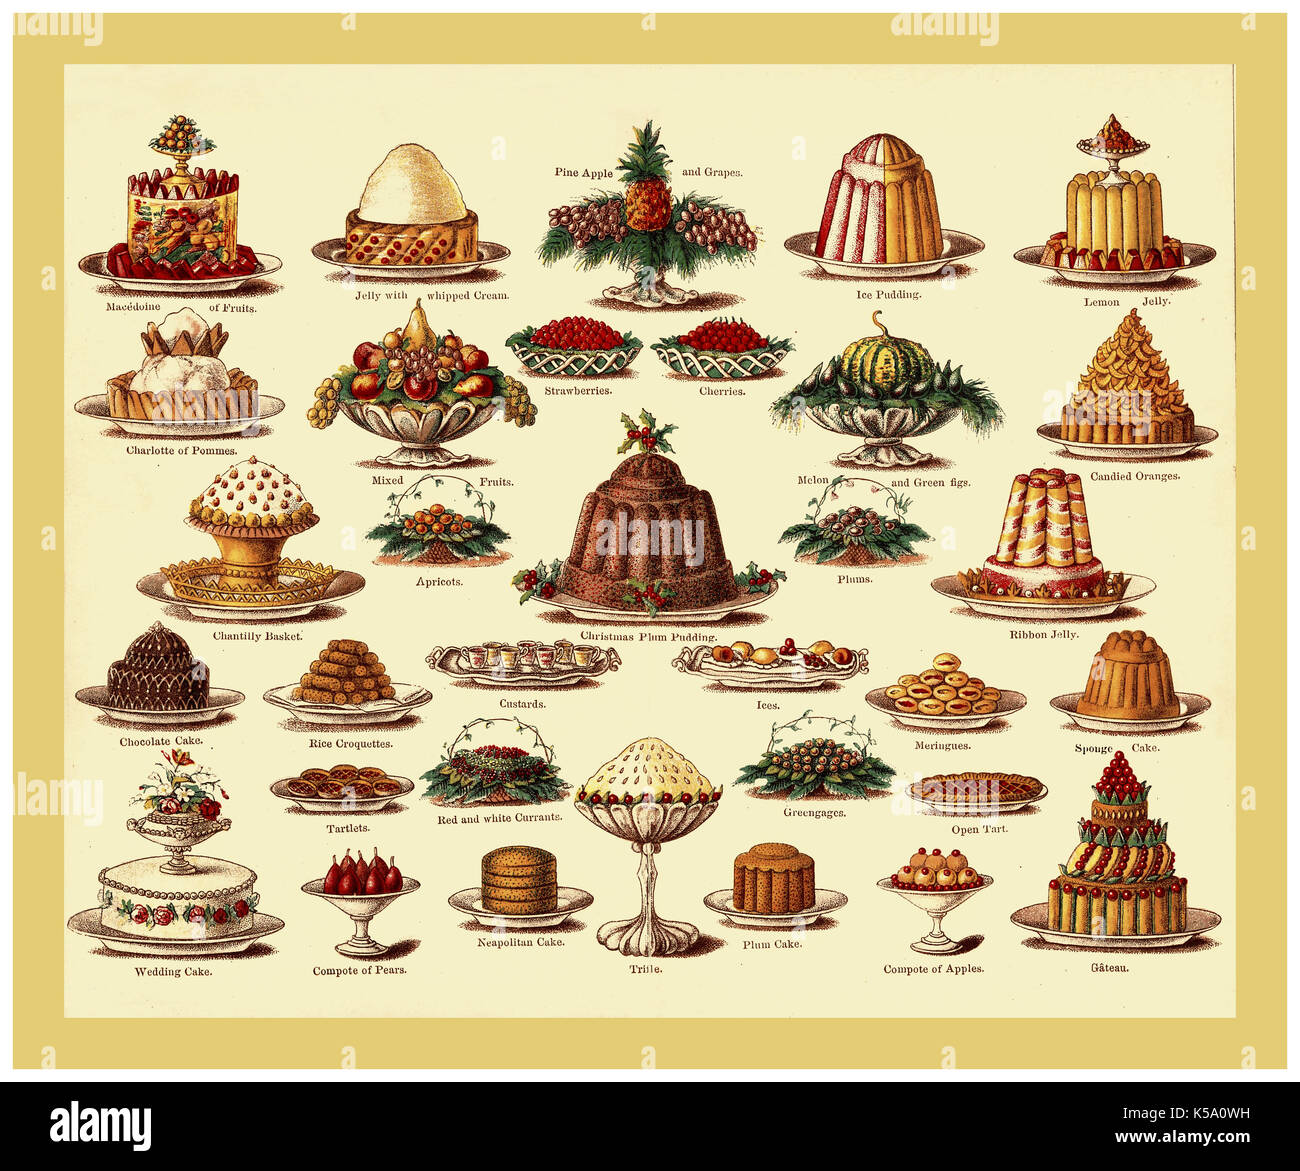 VICTORIAN CHRISTMAS FOOD PUDDINGS DESSERTS CAKE VINTAGE MRS BEETON'S Colour lithograph from Mrs Beetons Cookery Book illustrating wide variety of English Christmas Victorian Puddings 1800s-1900s Stock Photo